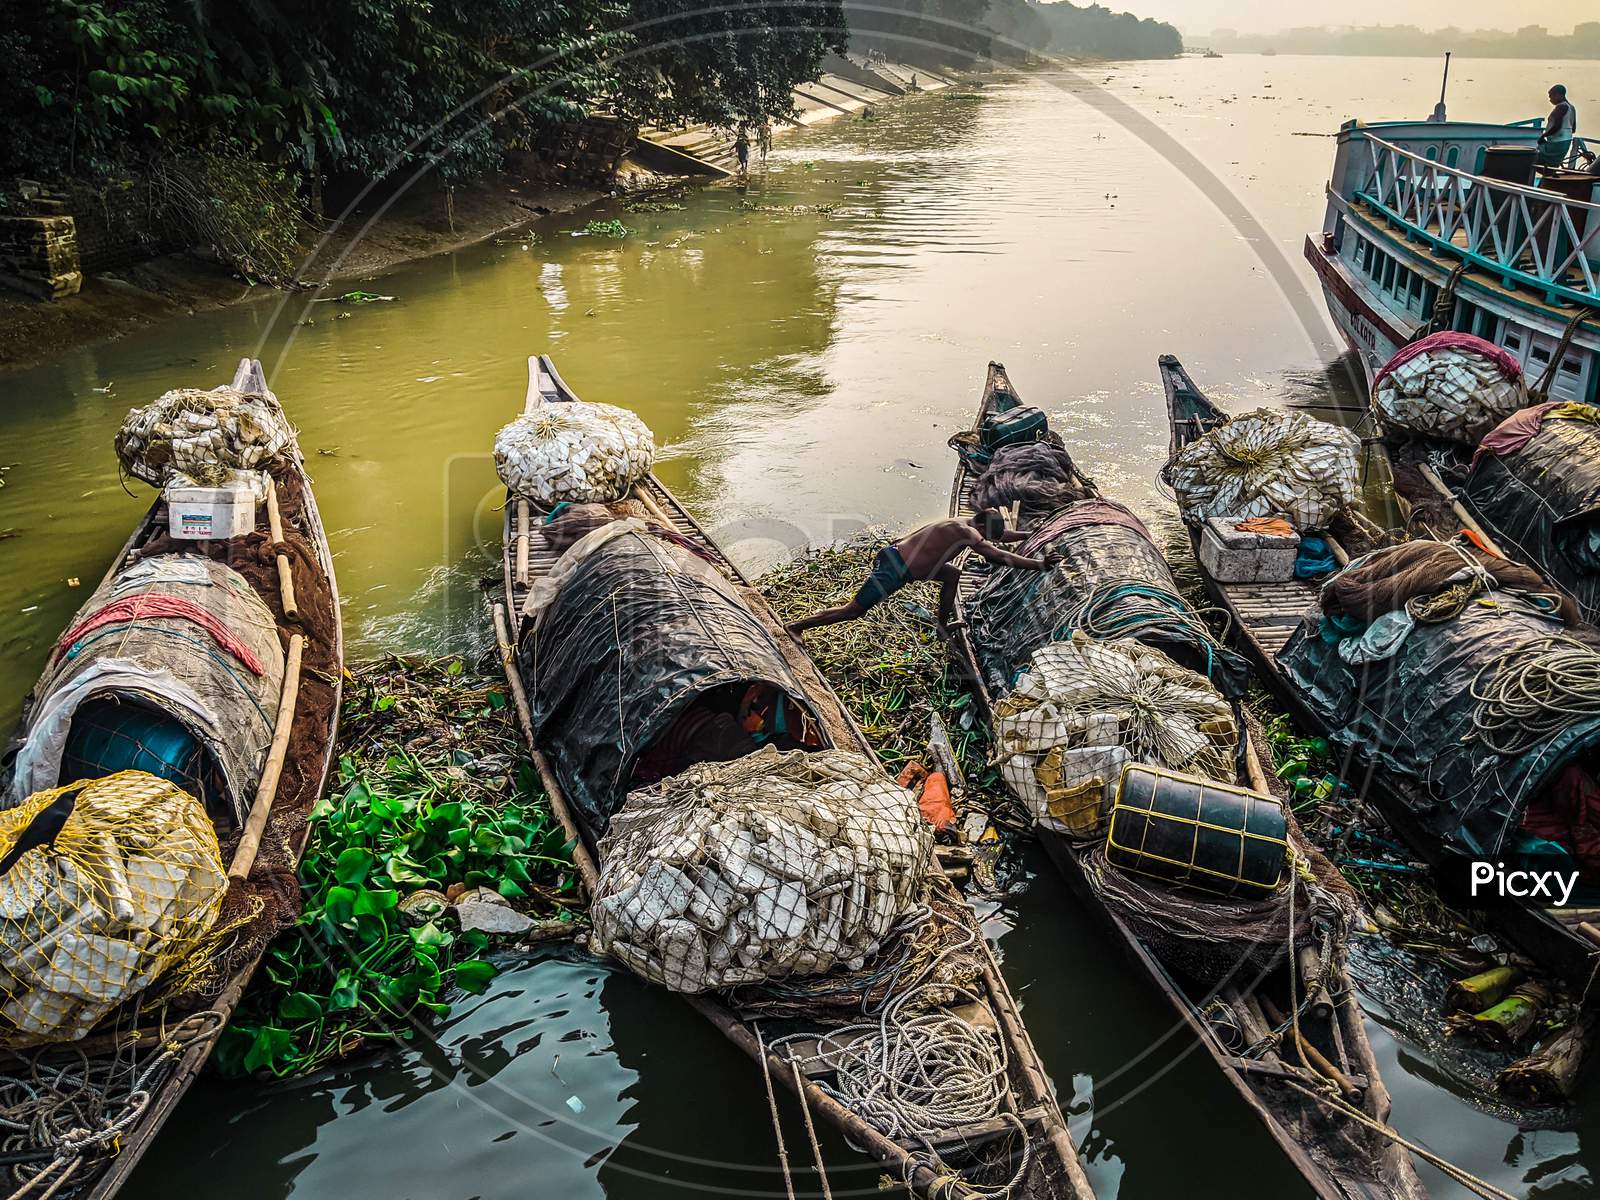 Boats are tied together on Ganges River, Polluted water of river in city, garbage on river. landscape view of Ganges river